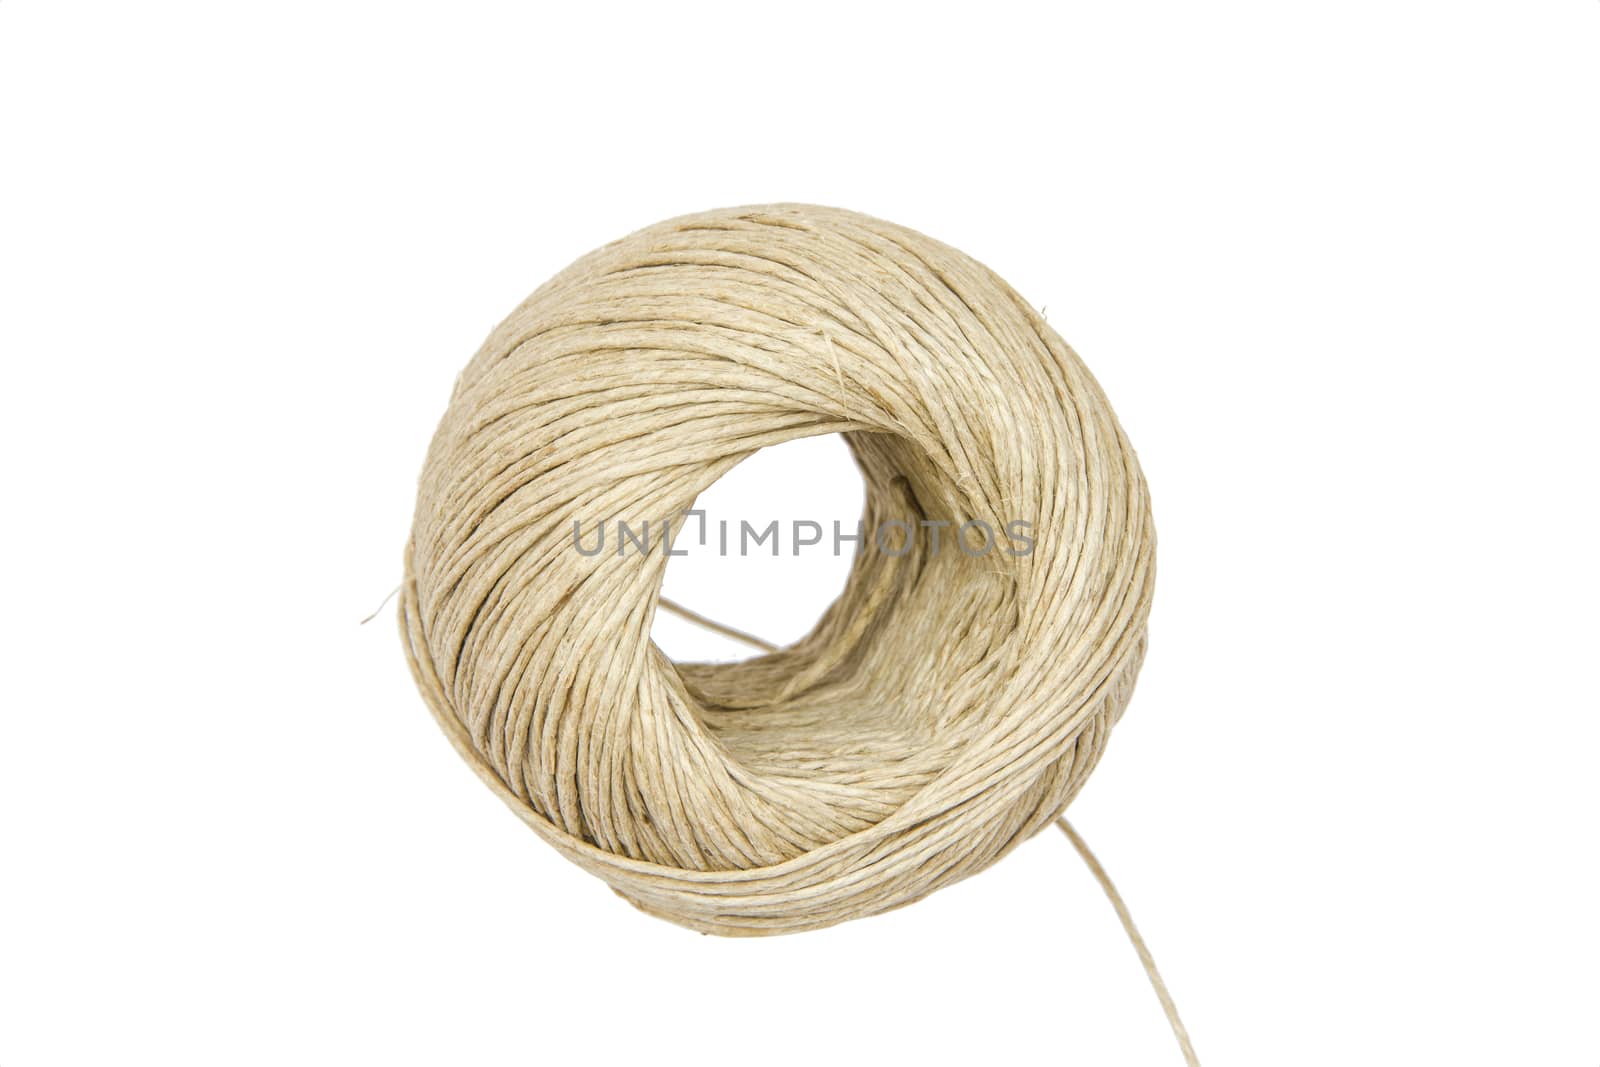 A ball of string isolated on white background by huntz